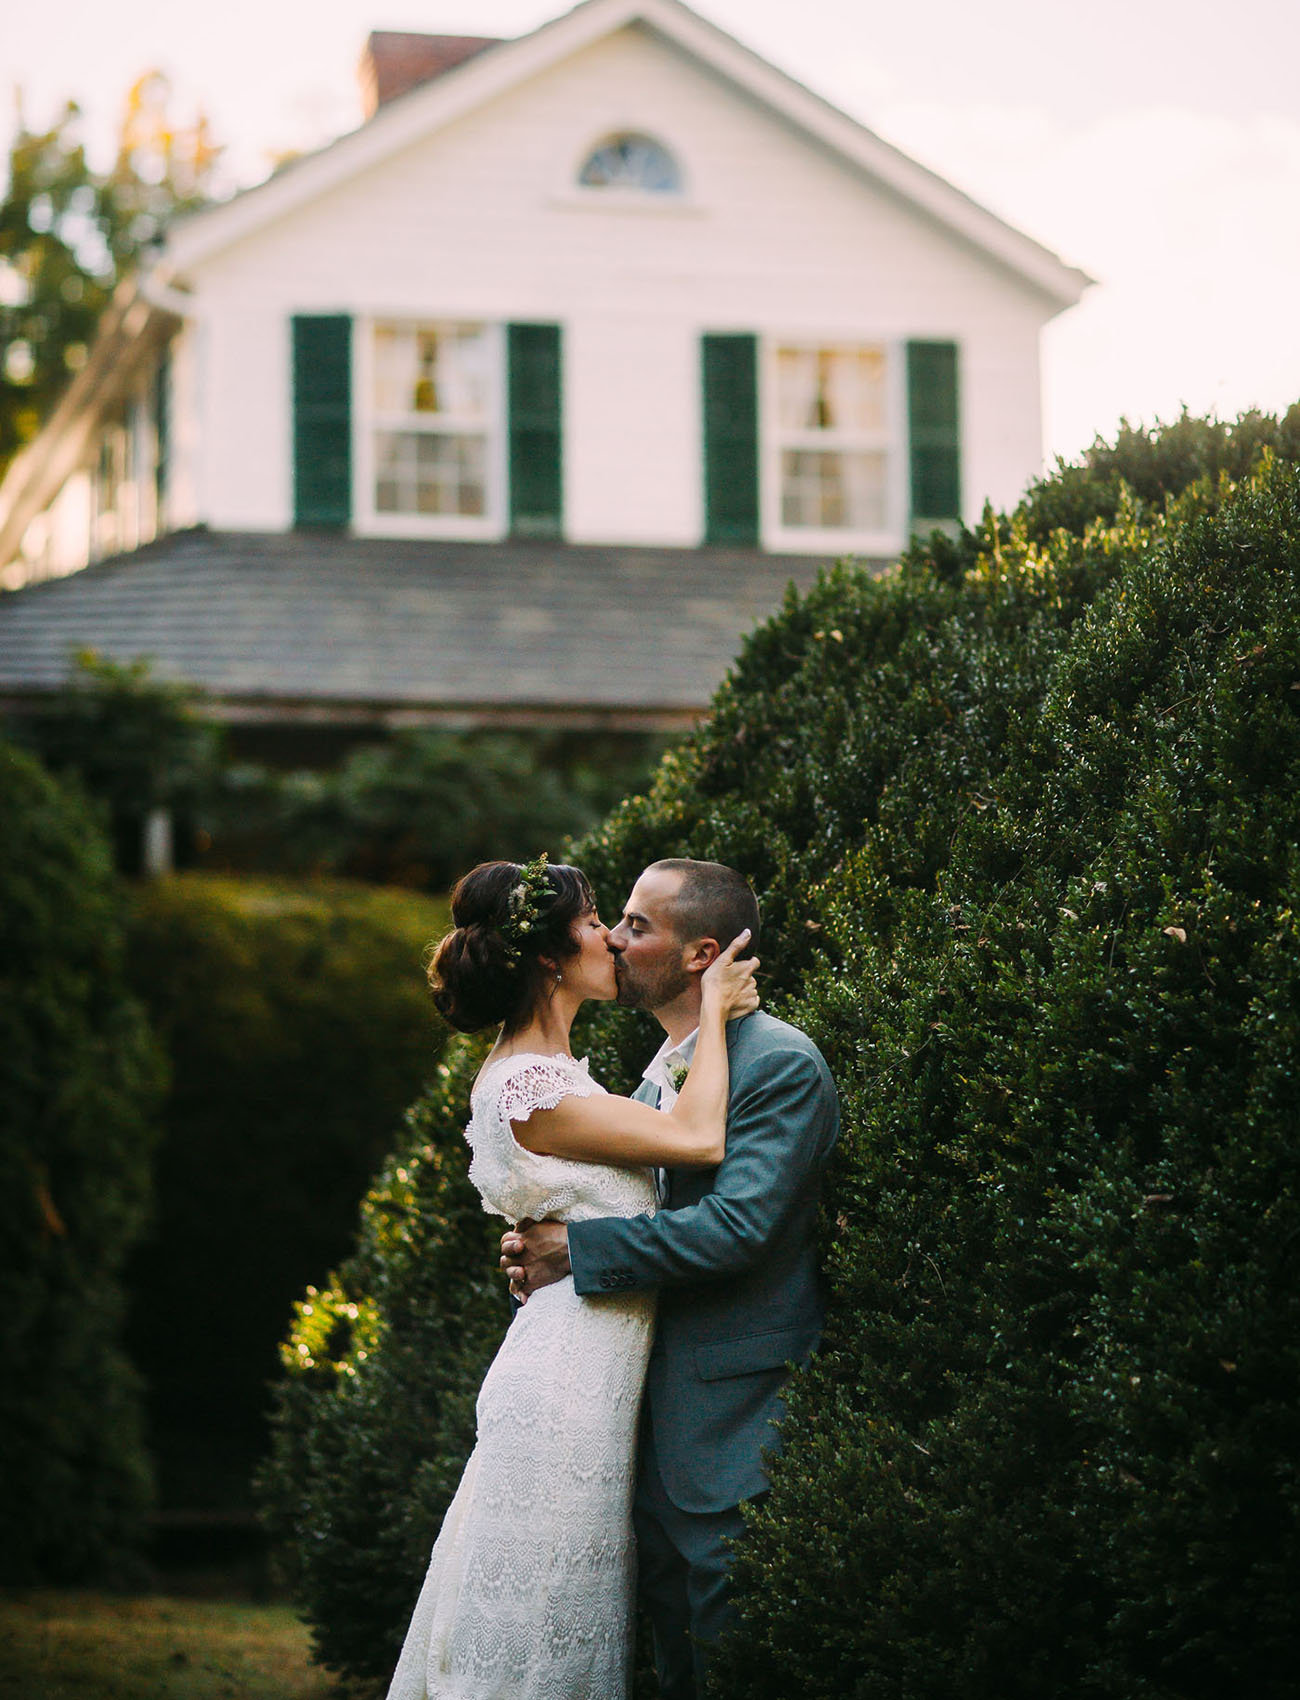 A Rustic Asheville Wedding for the Founders of East Fork Pottery